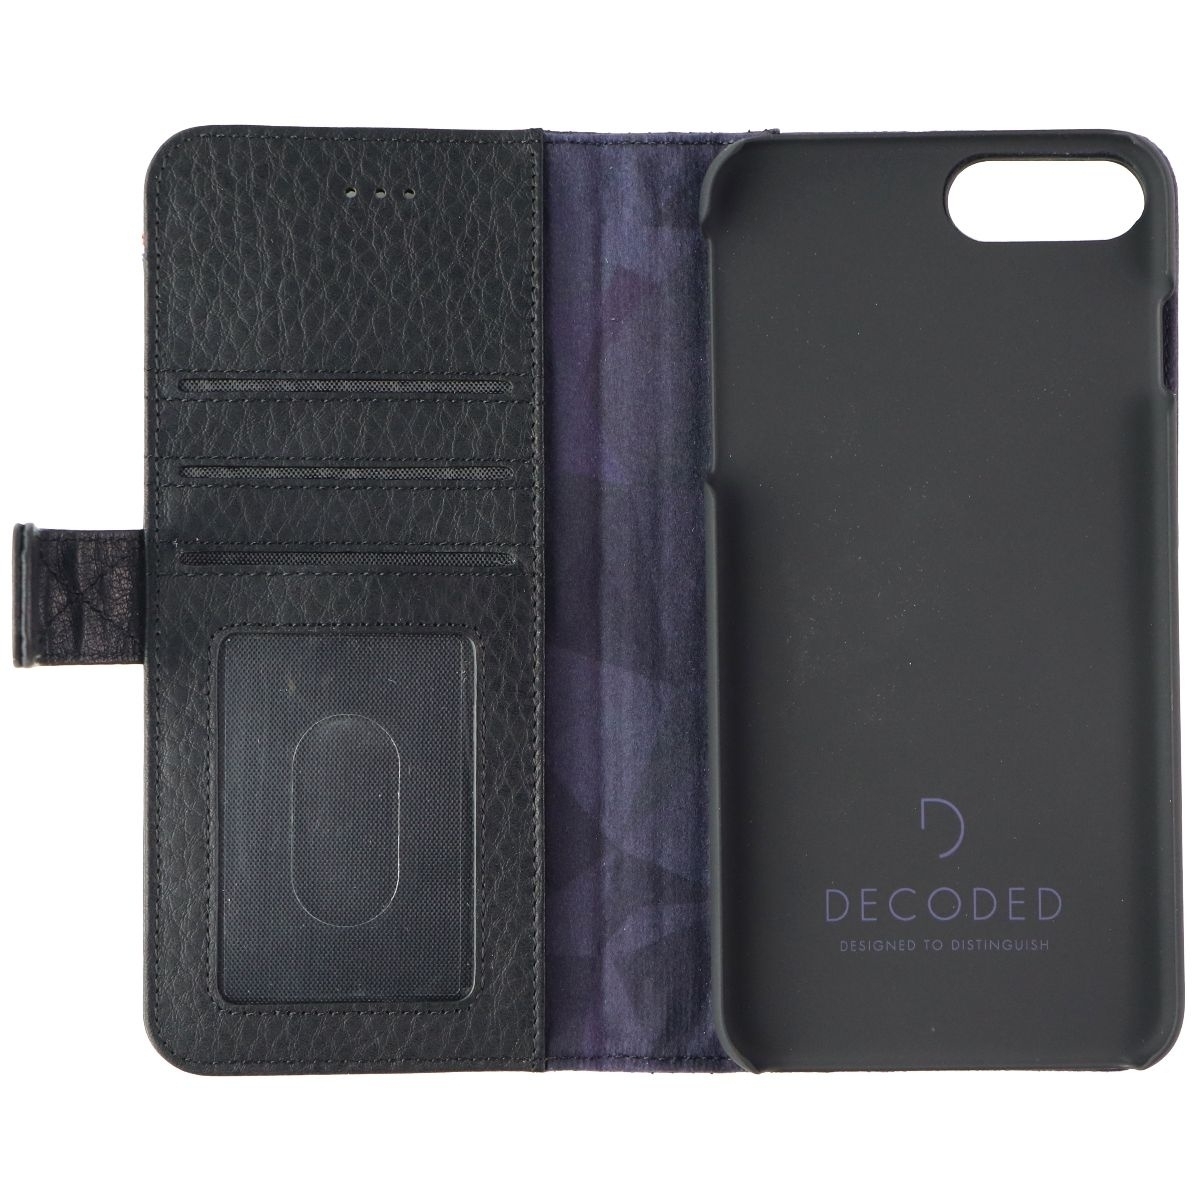 Decoded Magnetic Leather Case For IPhone 8Â Plus / 7 Plus / 6s Plus - Black